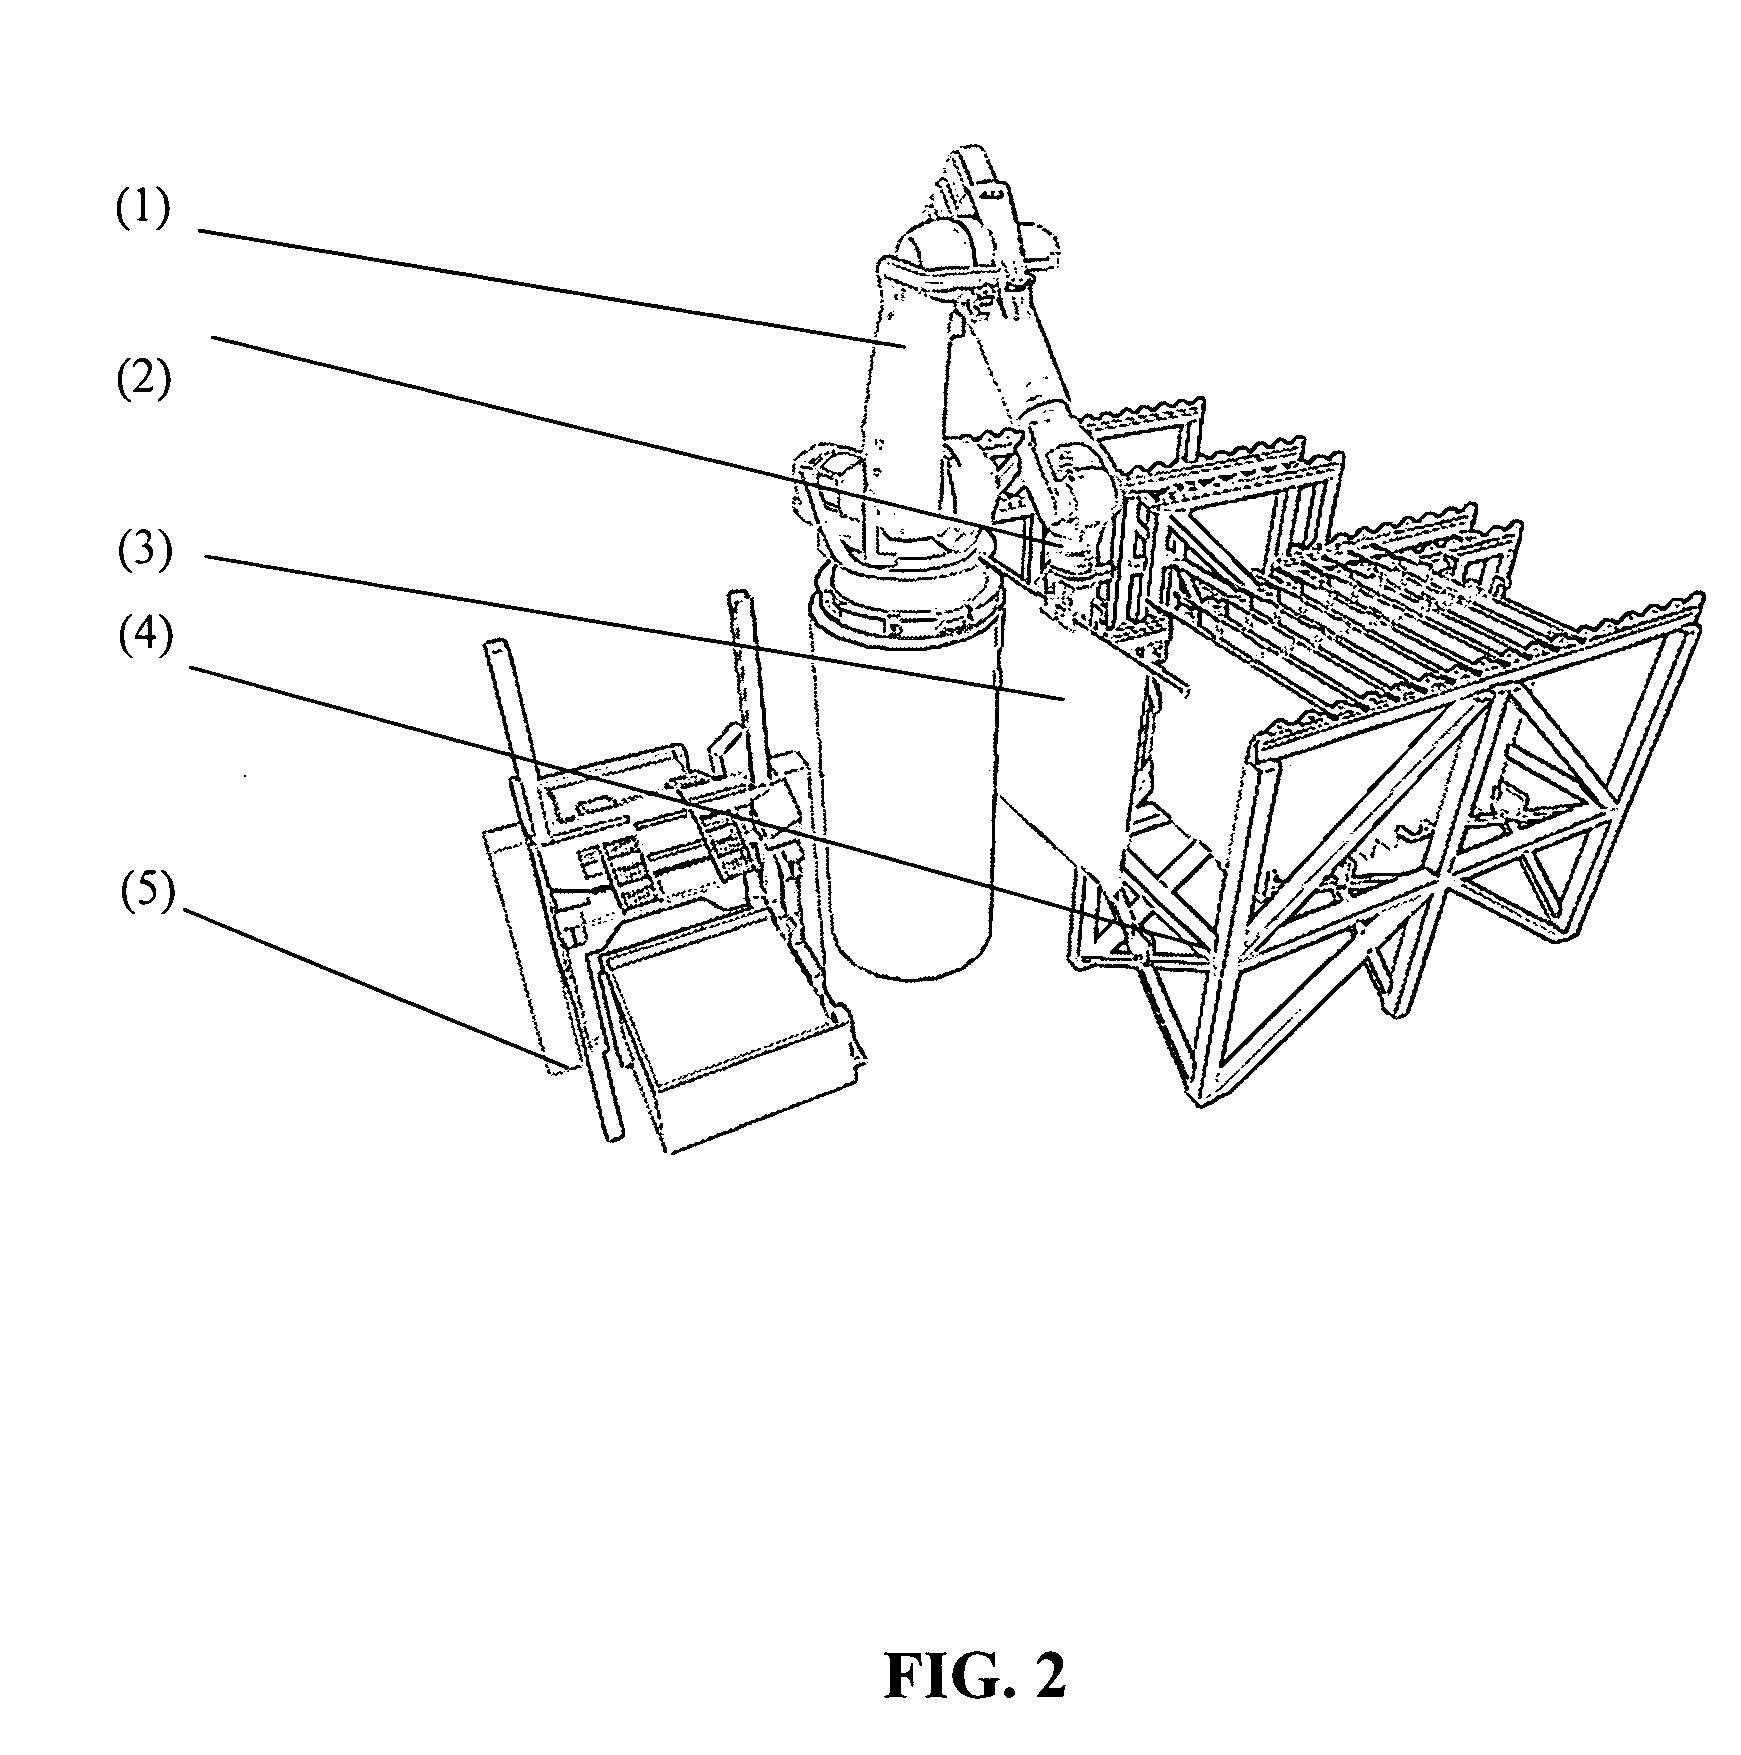 Robot system and method for cathode stripping in electrometallurgical and industrial processes